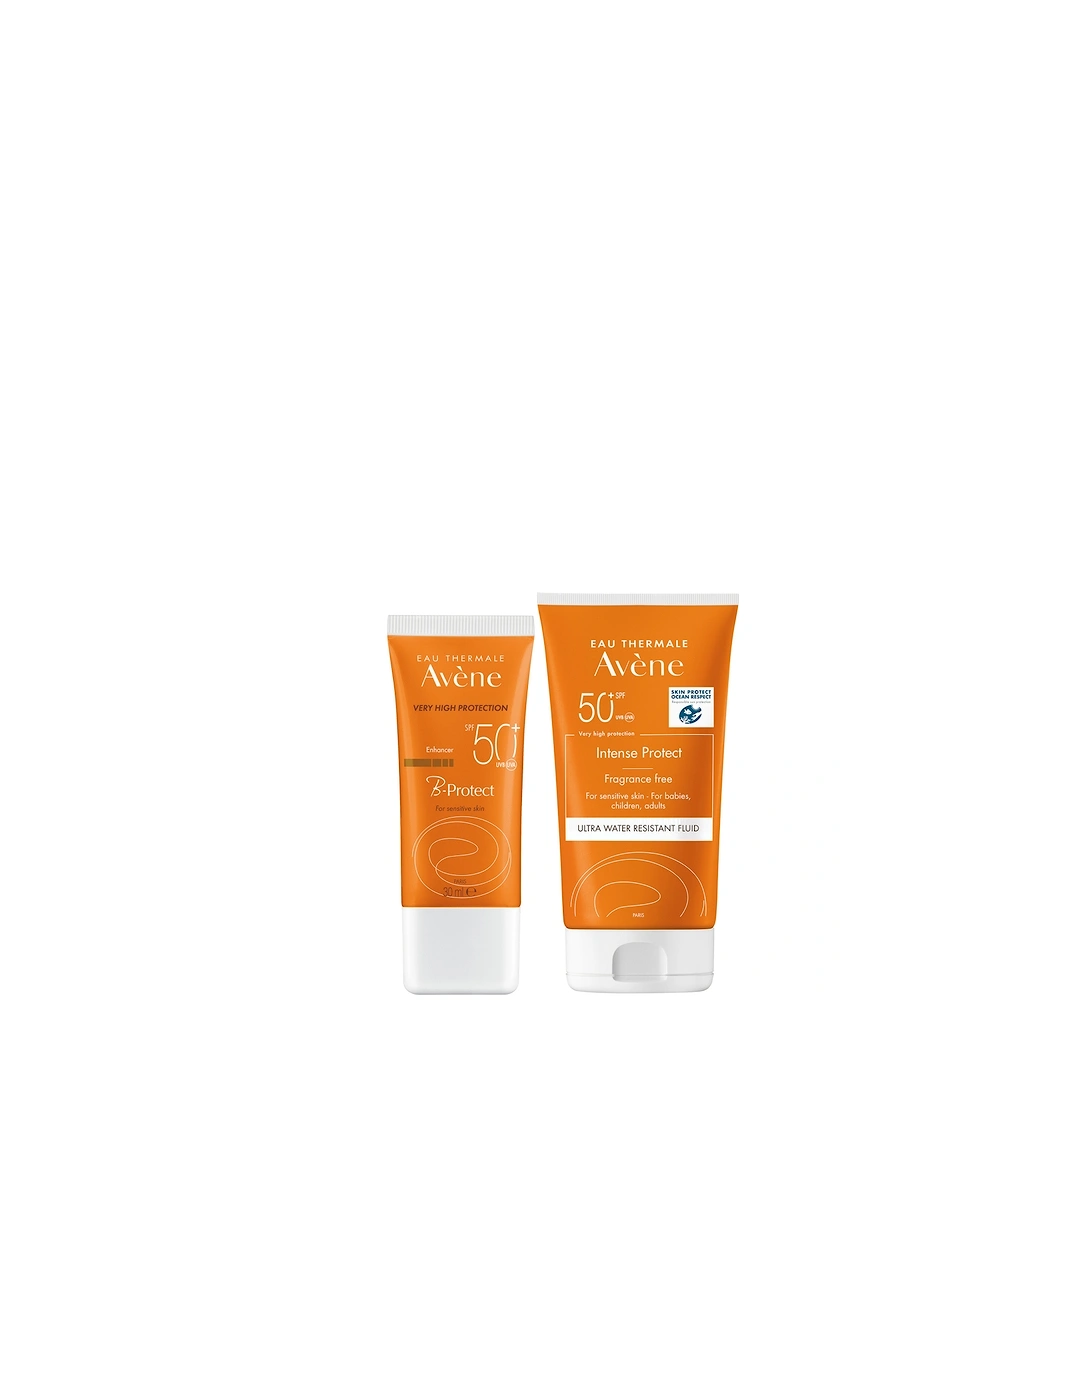 Avène SPF50+ Face & Body Icons, 2 of 1